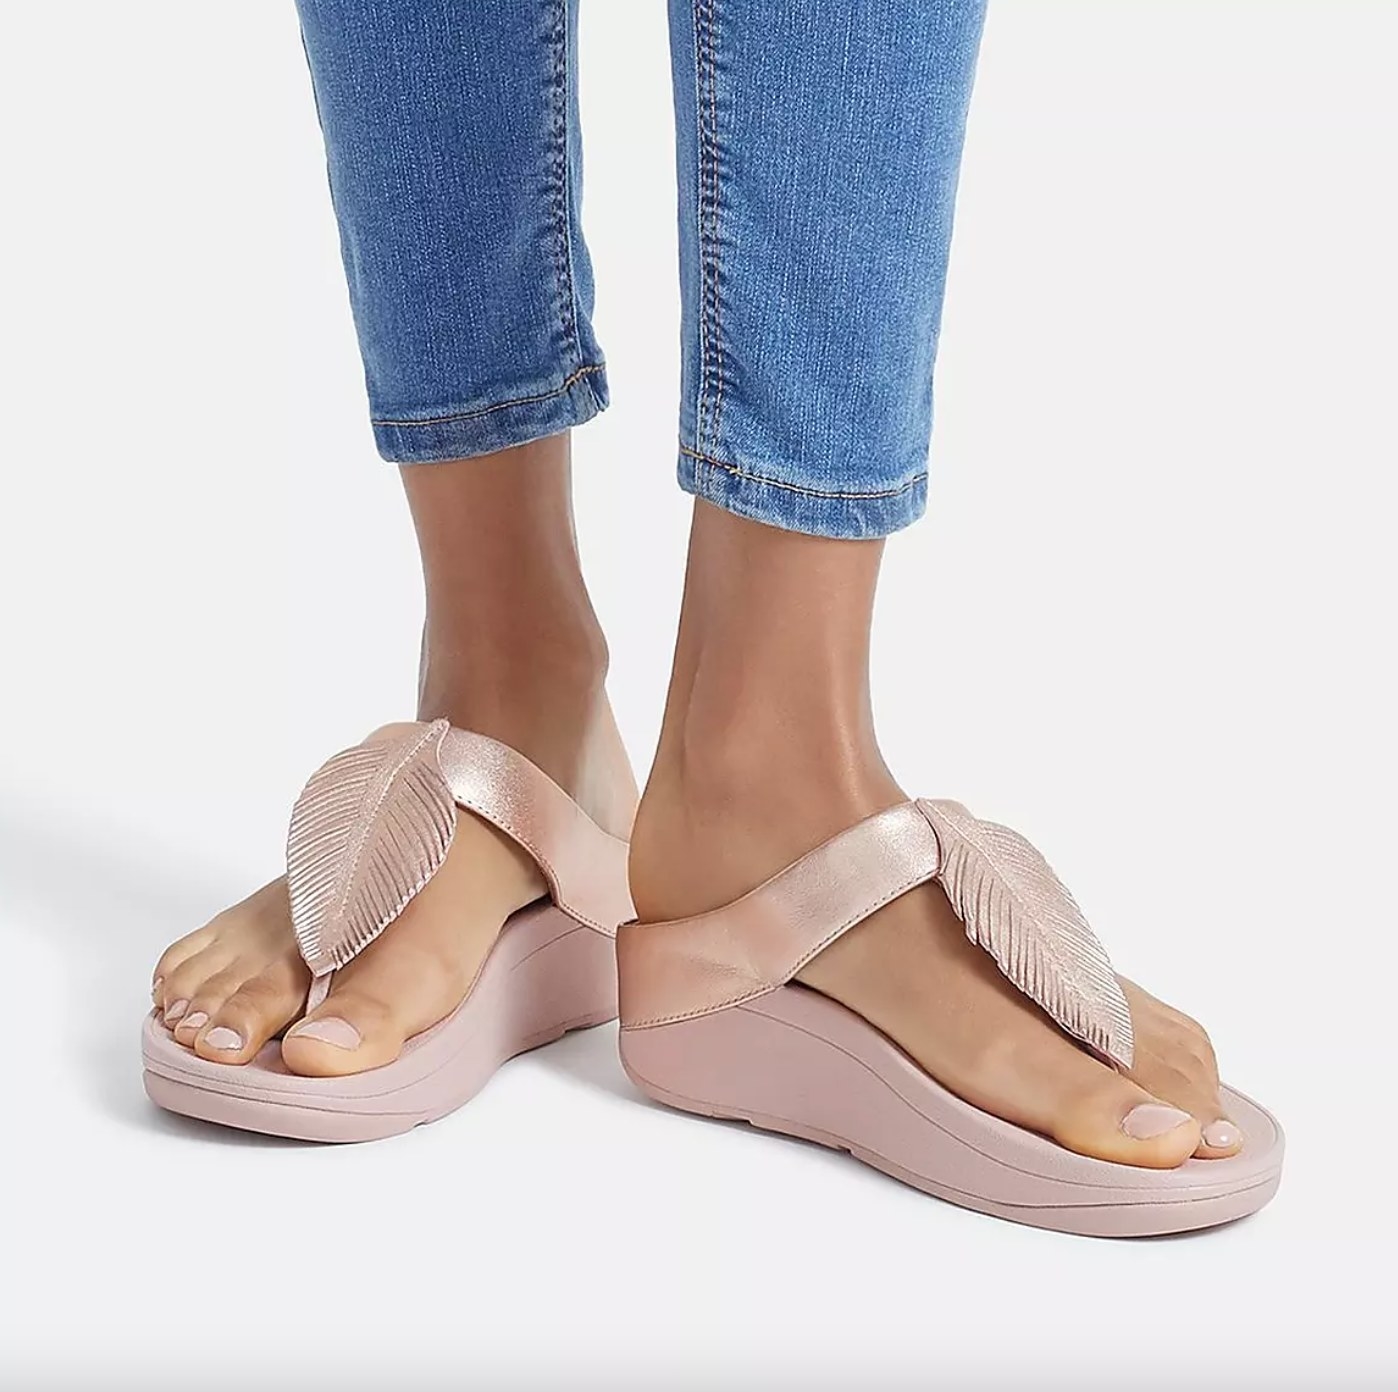 The feather metallic toe post sandal in rose gold